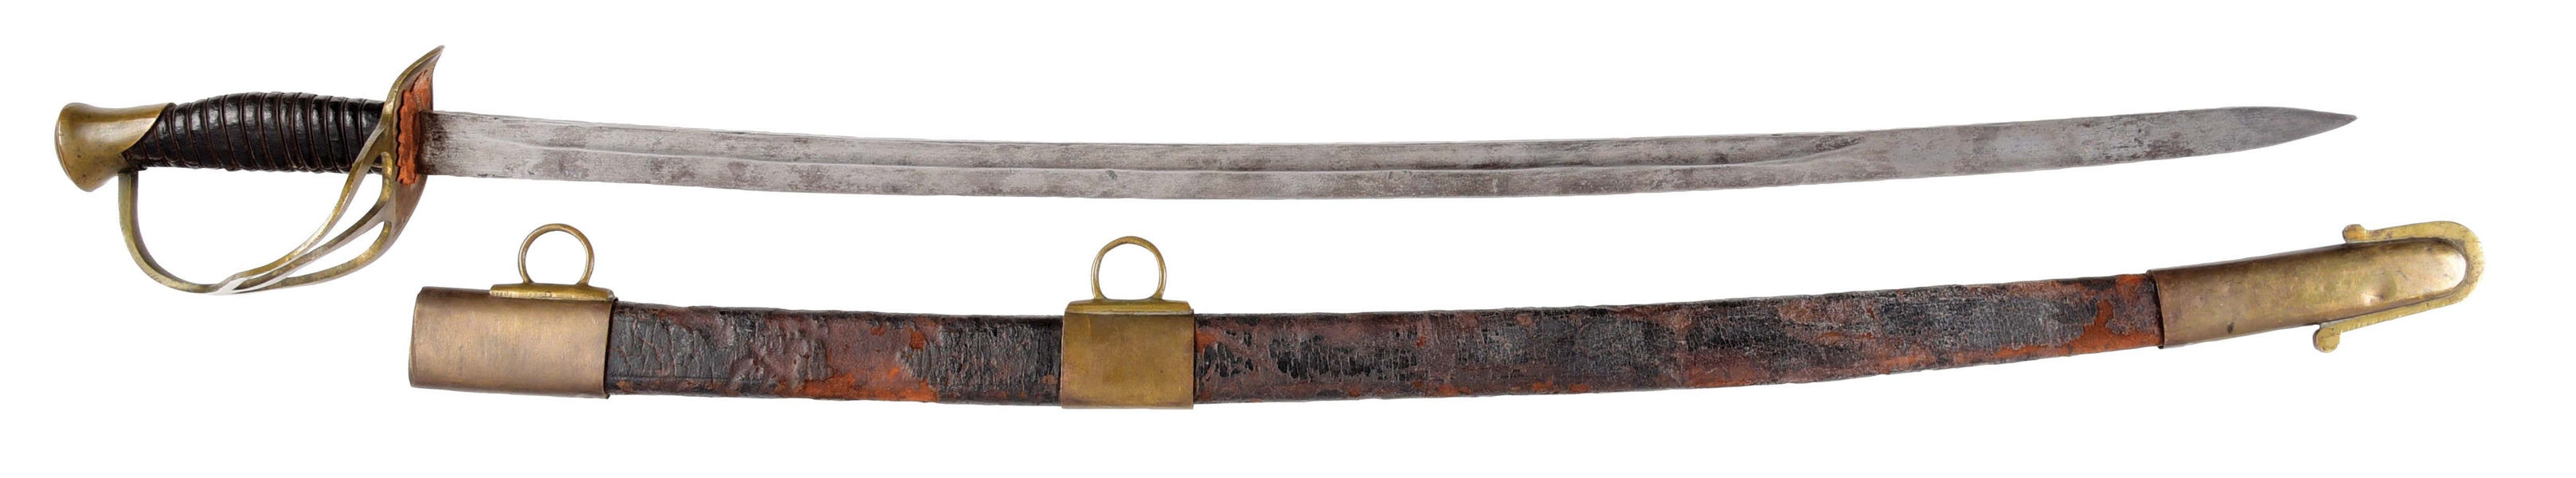 RARE DOUGLAS ENLISTED CONFEDERATE CAVALRY SABER WITH LEATHER SCABBARD.